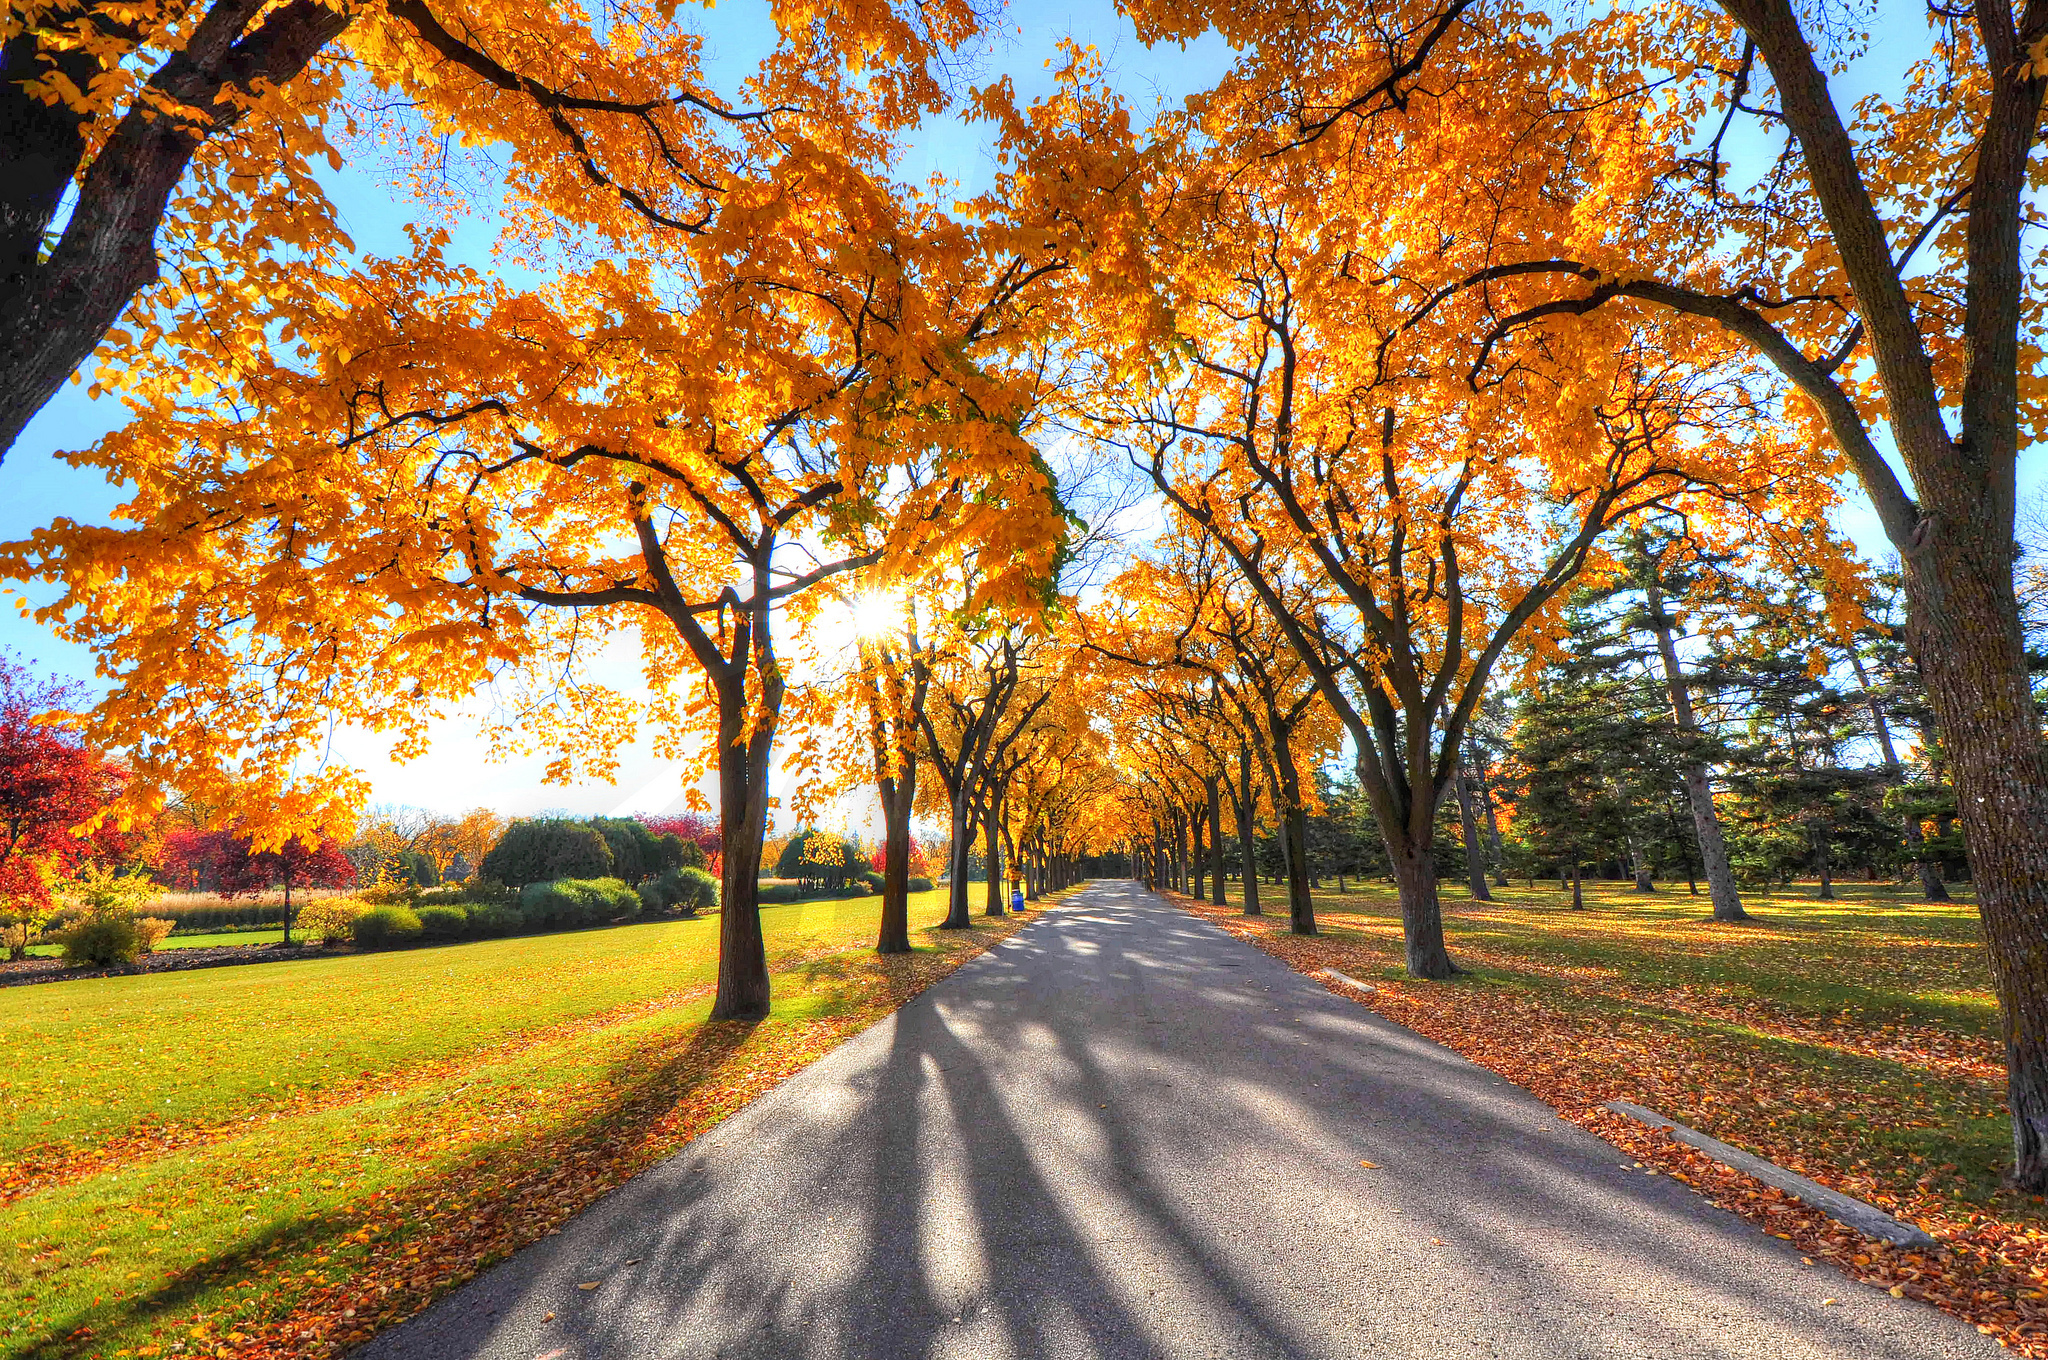 trees, nature, autumn, park, alley iphone wallpaper